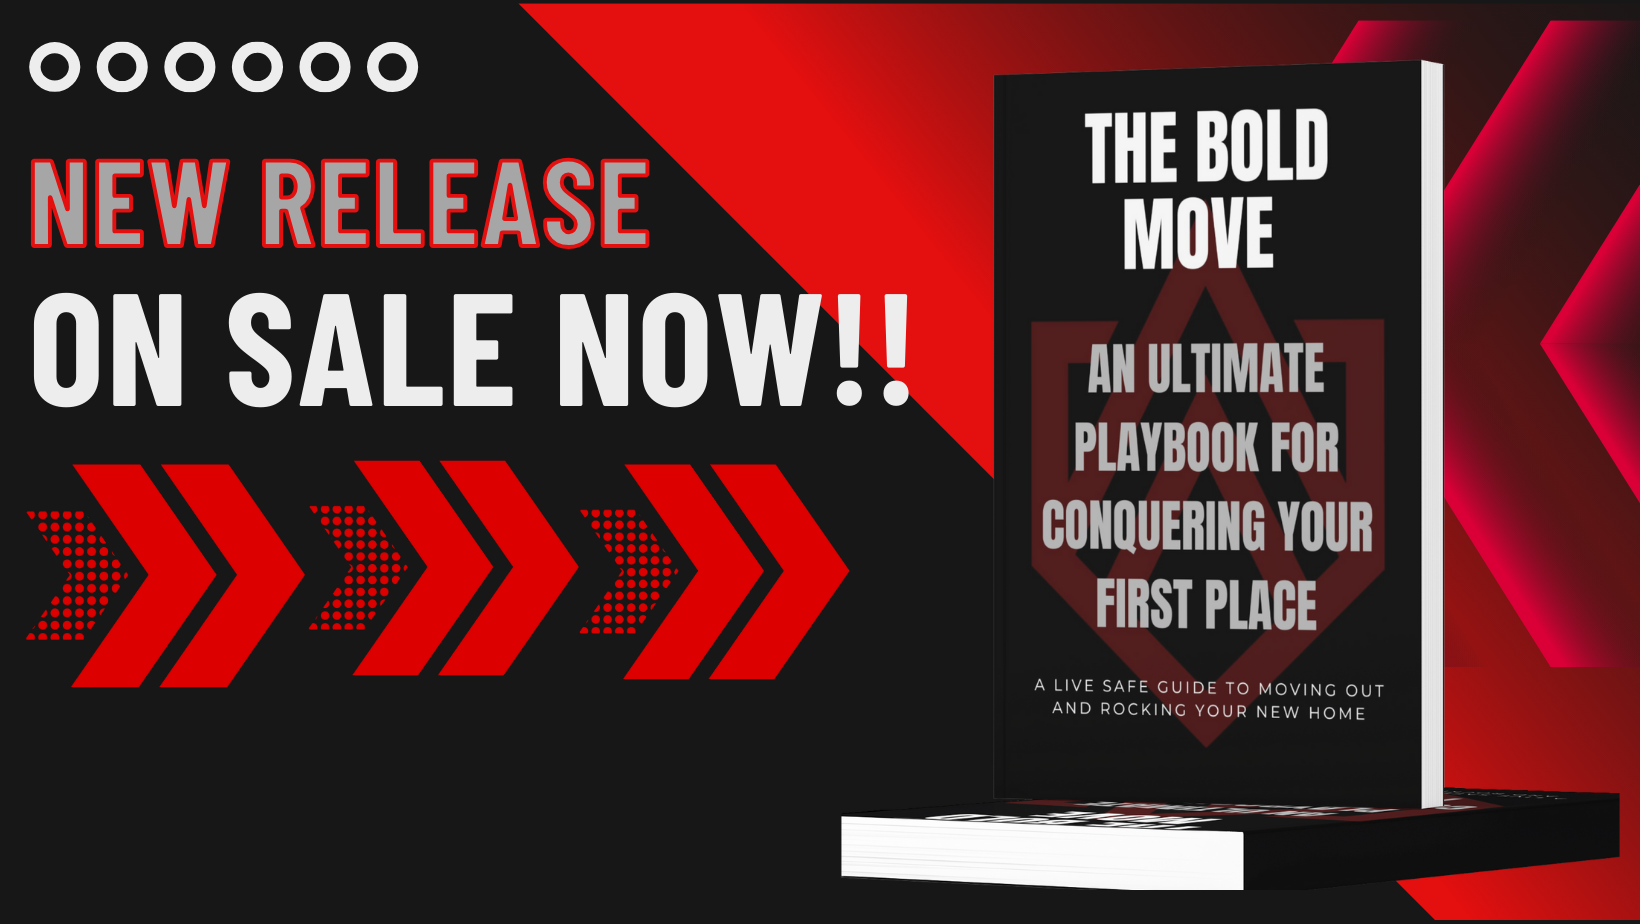 Haute Media Collaborates with Live Safe Supply Co. to Launch "The Bold Move" Guide Book and Website